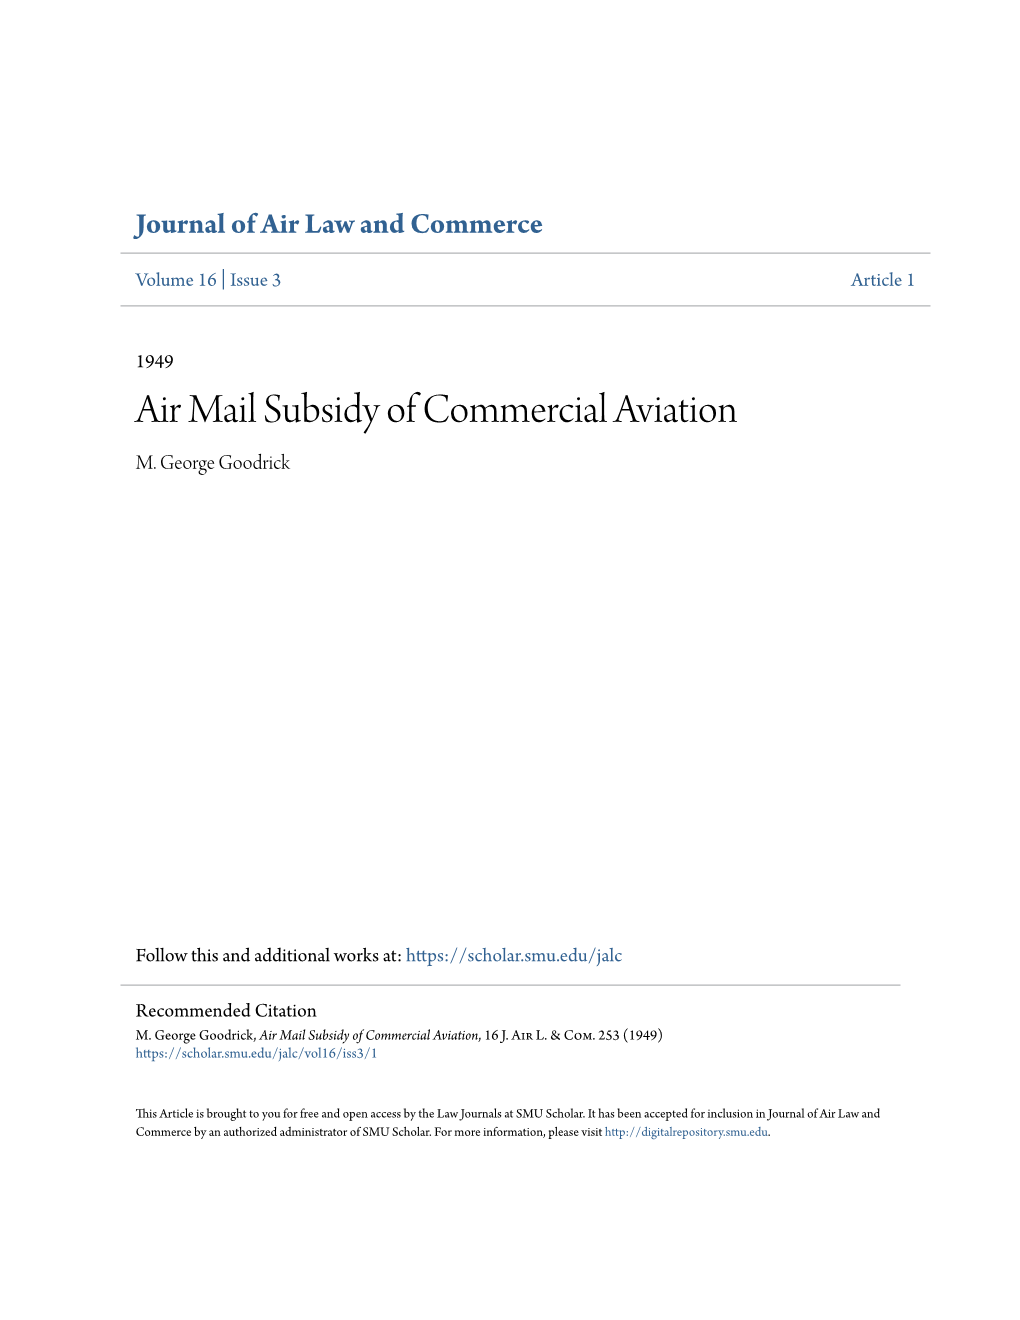 Air Mail Subsidy of Commercial Aviation M